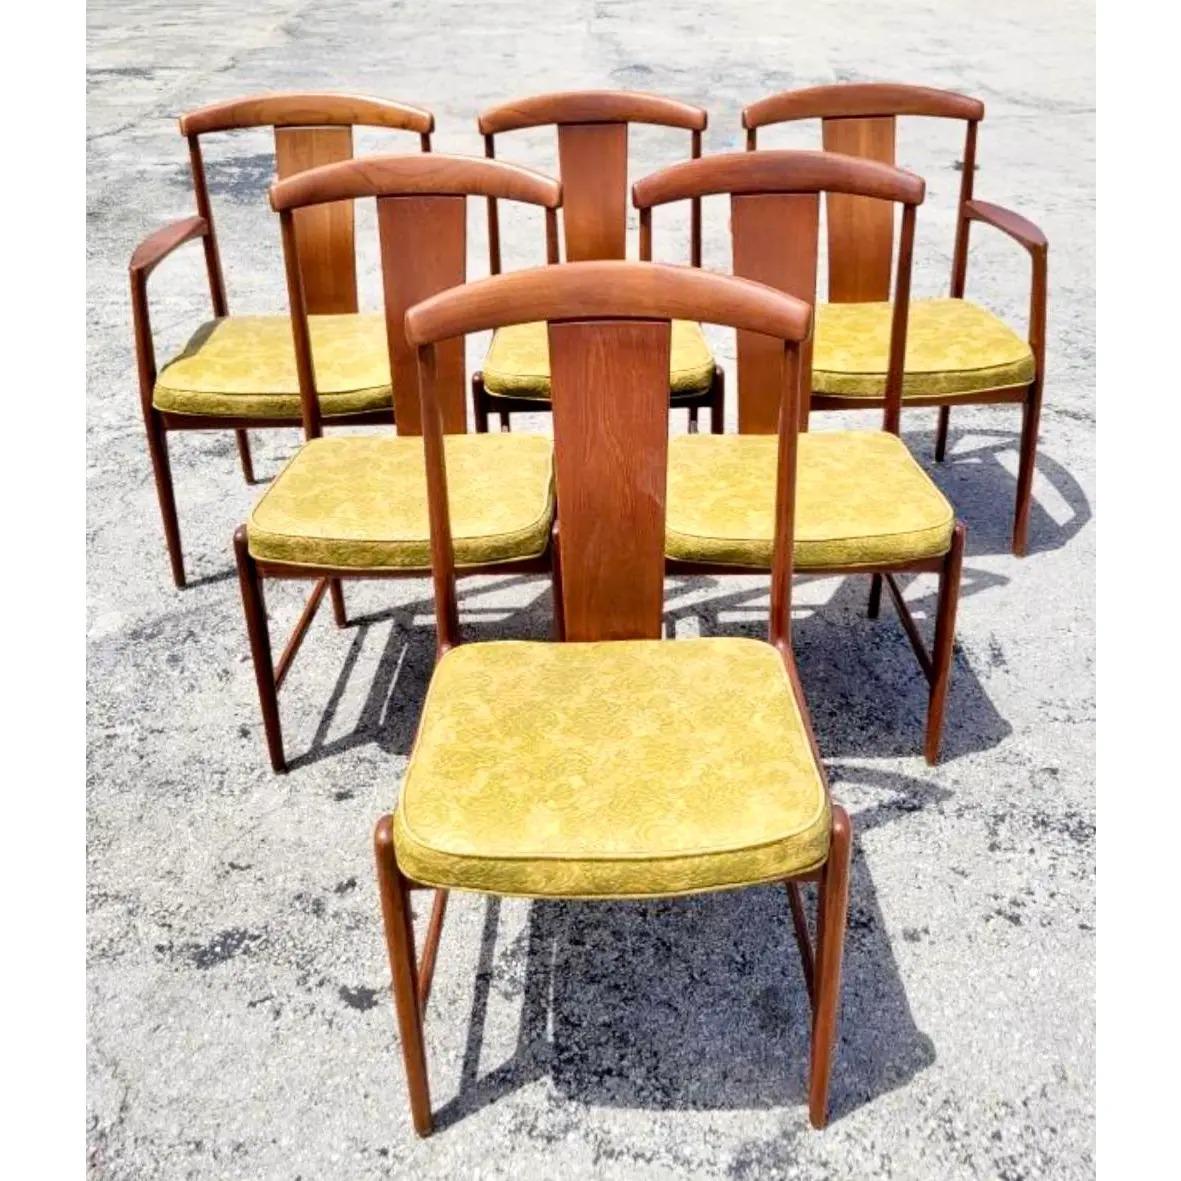 20th Century Vintage Swedish Folke Ohlsson for Dux Sweden Dining Chairs, Set of 6